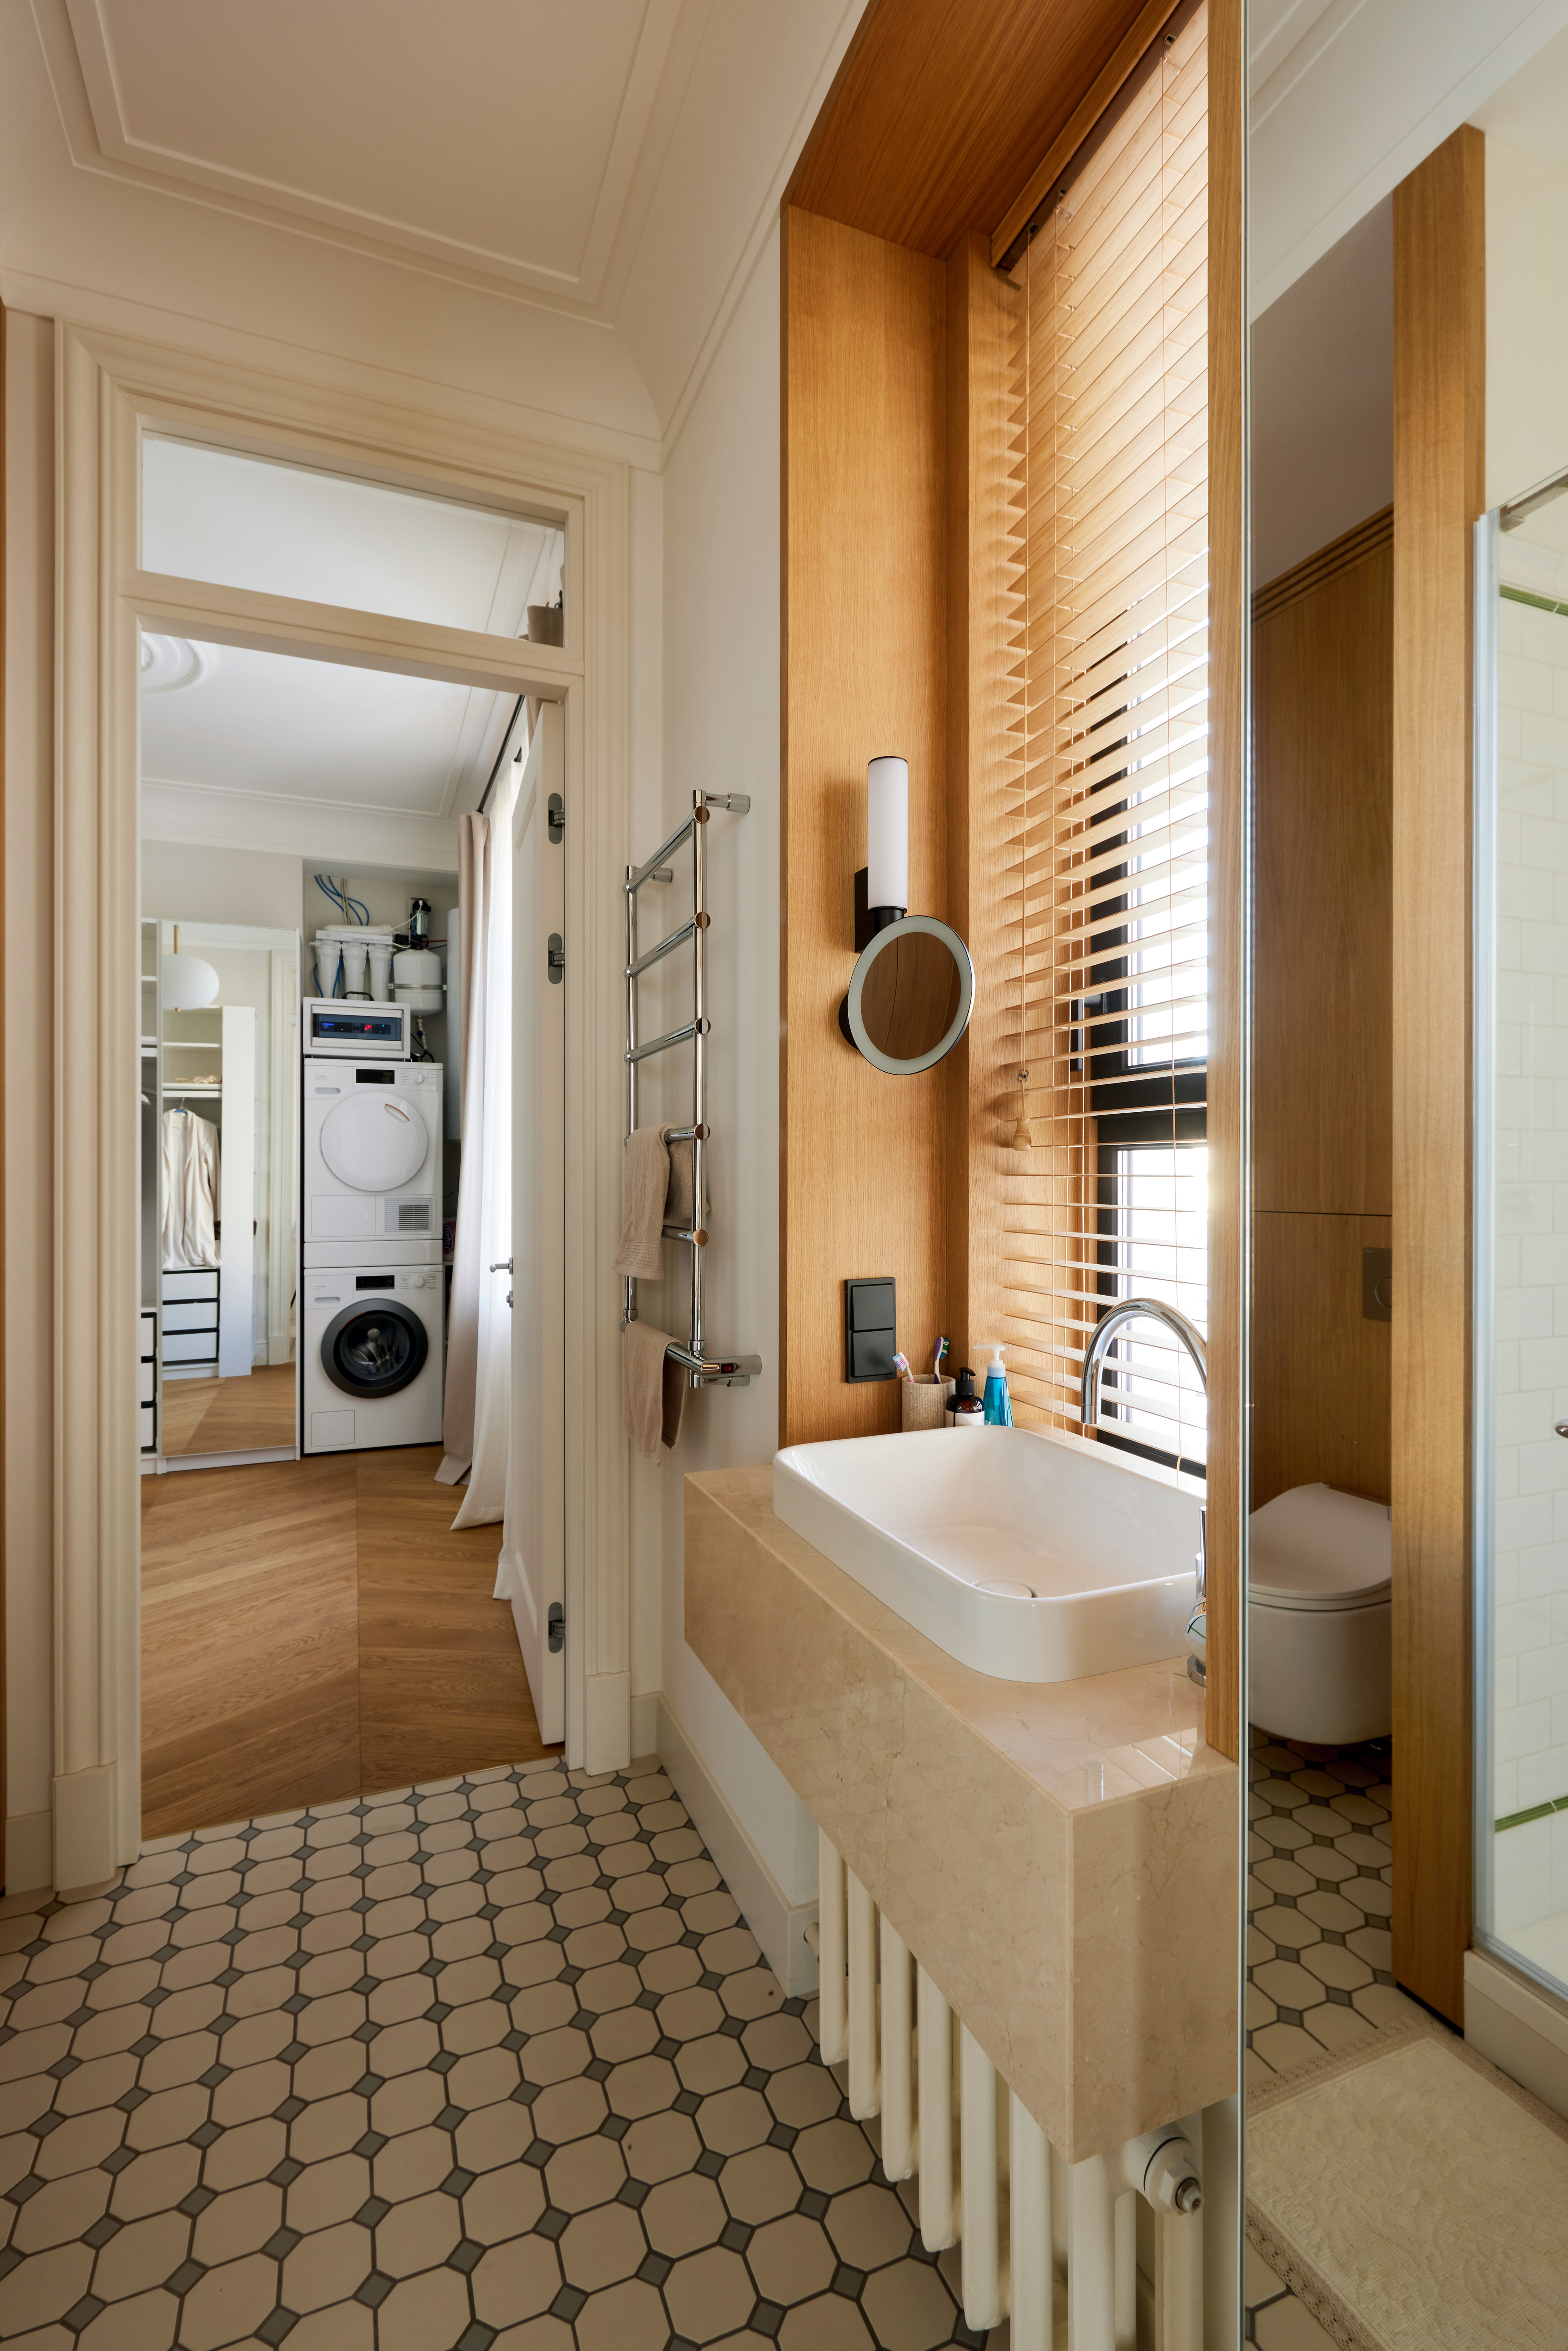 A bathroom with a sink and mirror opens to a view of a laundry room and closet